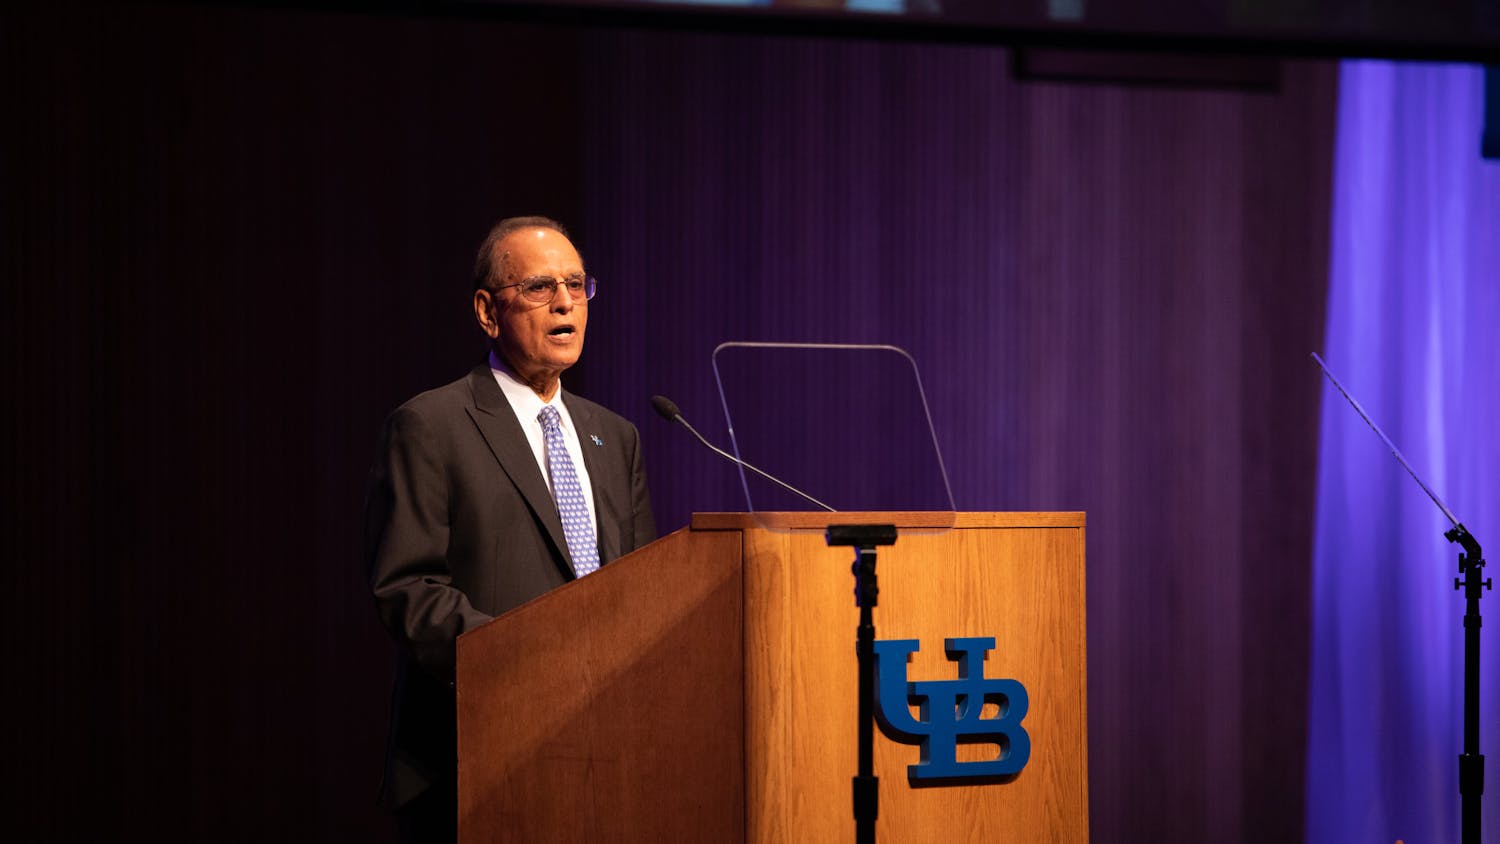 President Satish Tripathi speaks at the annual State of the University Address. The faculty senate will hold a confidence vote on Robin Schulze, the Dean of the College of Arts and Sciences, President Satish Tripathi, and Provost A. Scott Weber on April 16 at 3 p.m.

